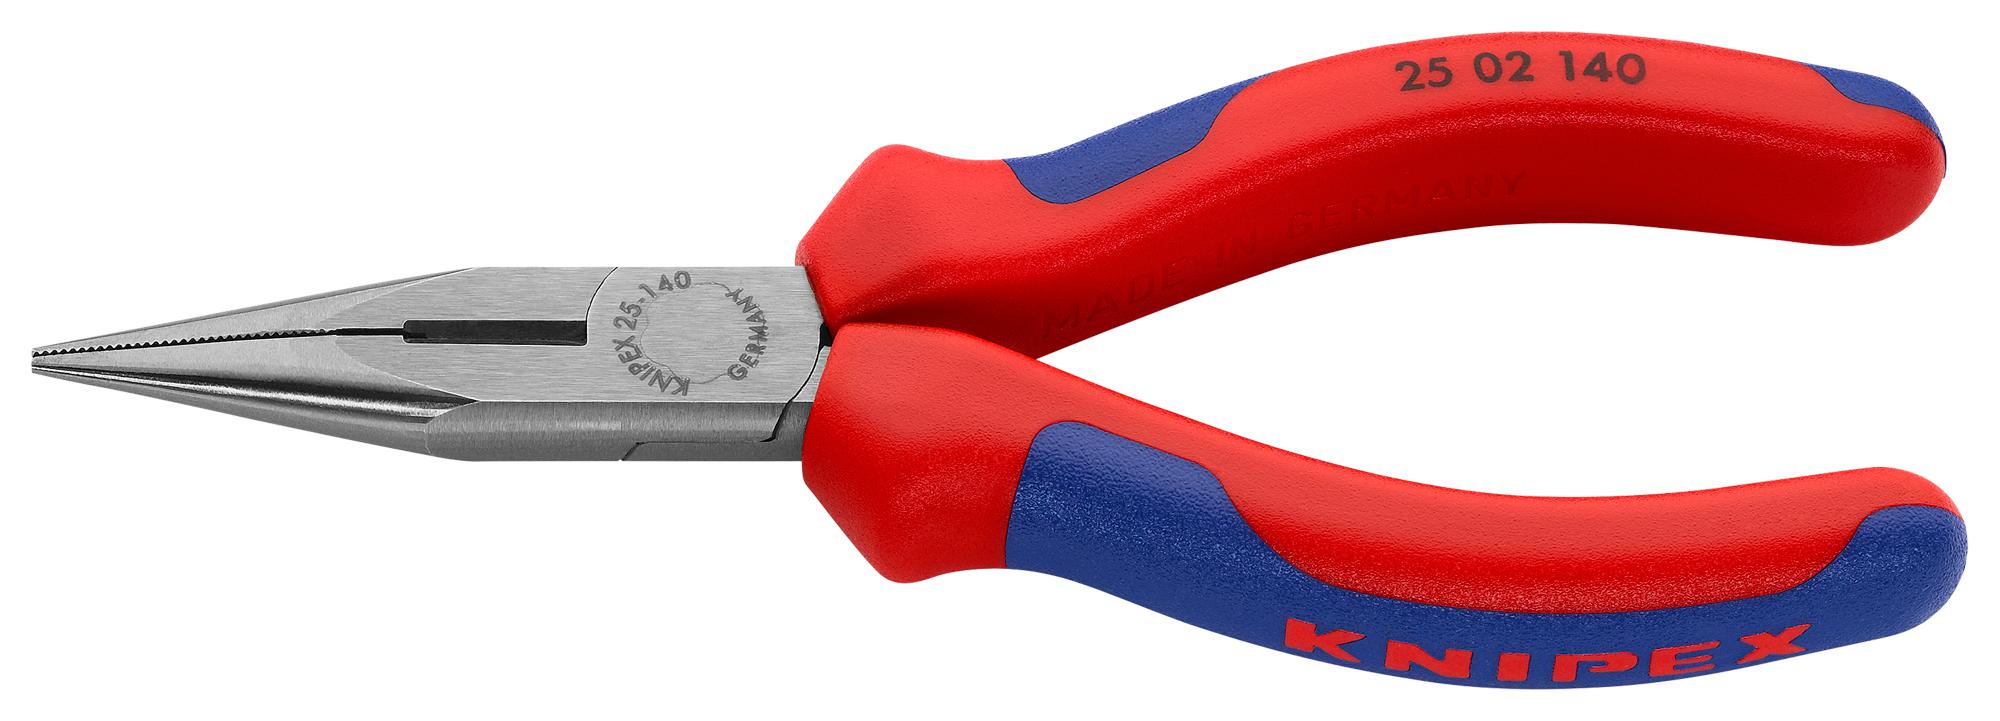 25 02 140 CUTTER, SIDE, CHAIN NOSE KNIPEX